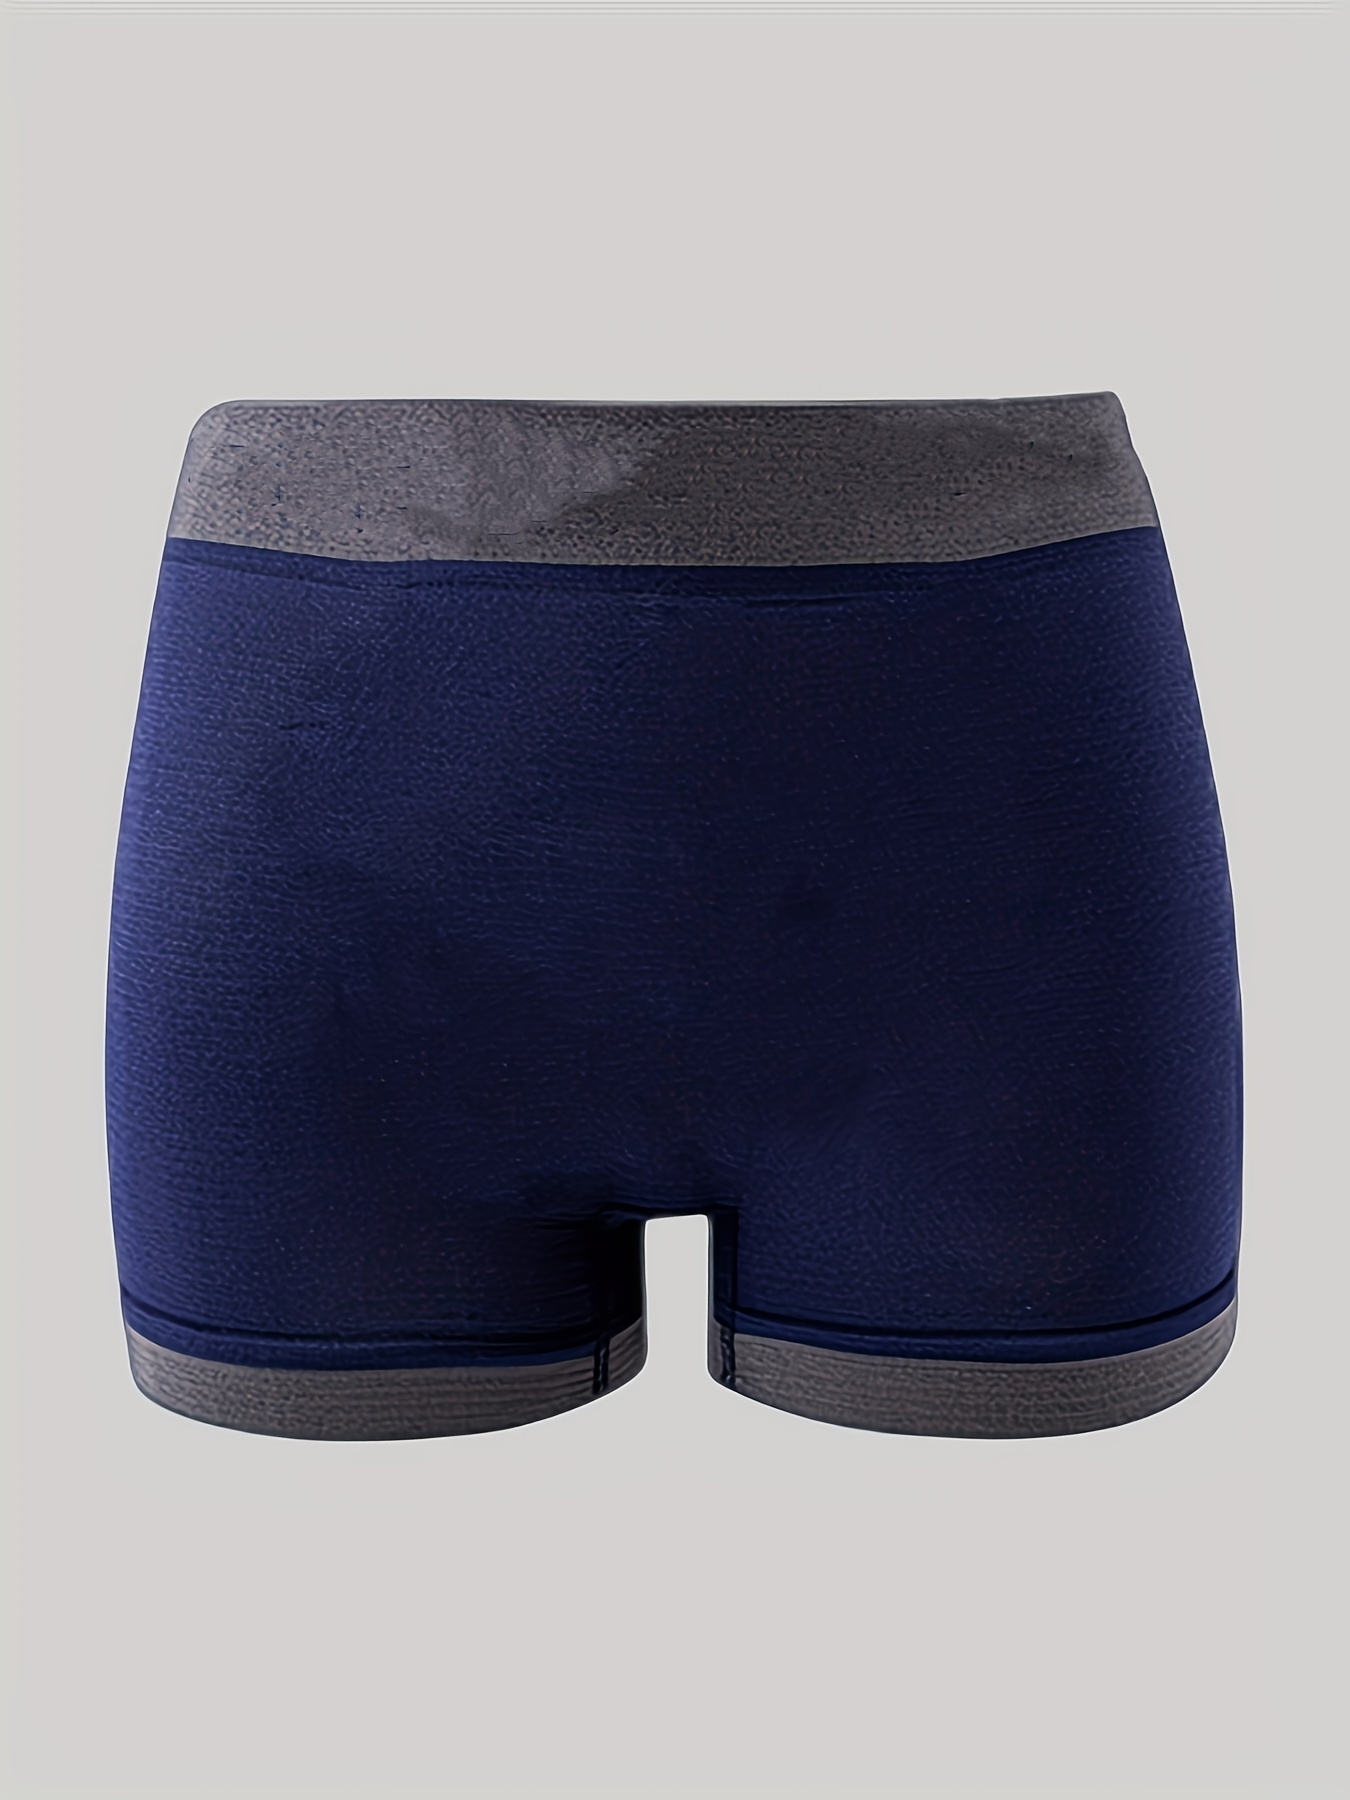 CONTRAST BOXER TROUSERS - Navy blue